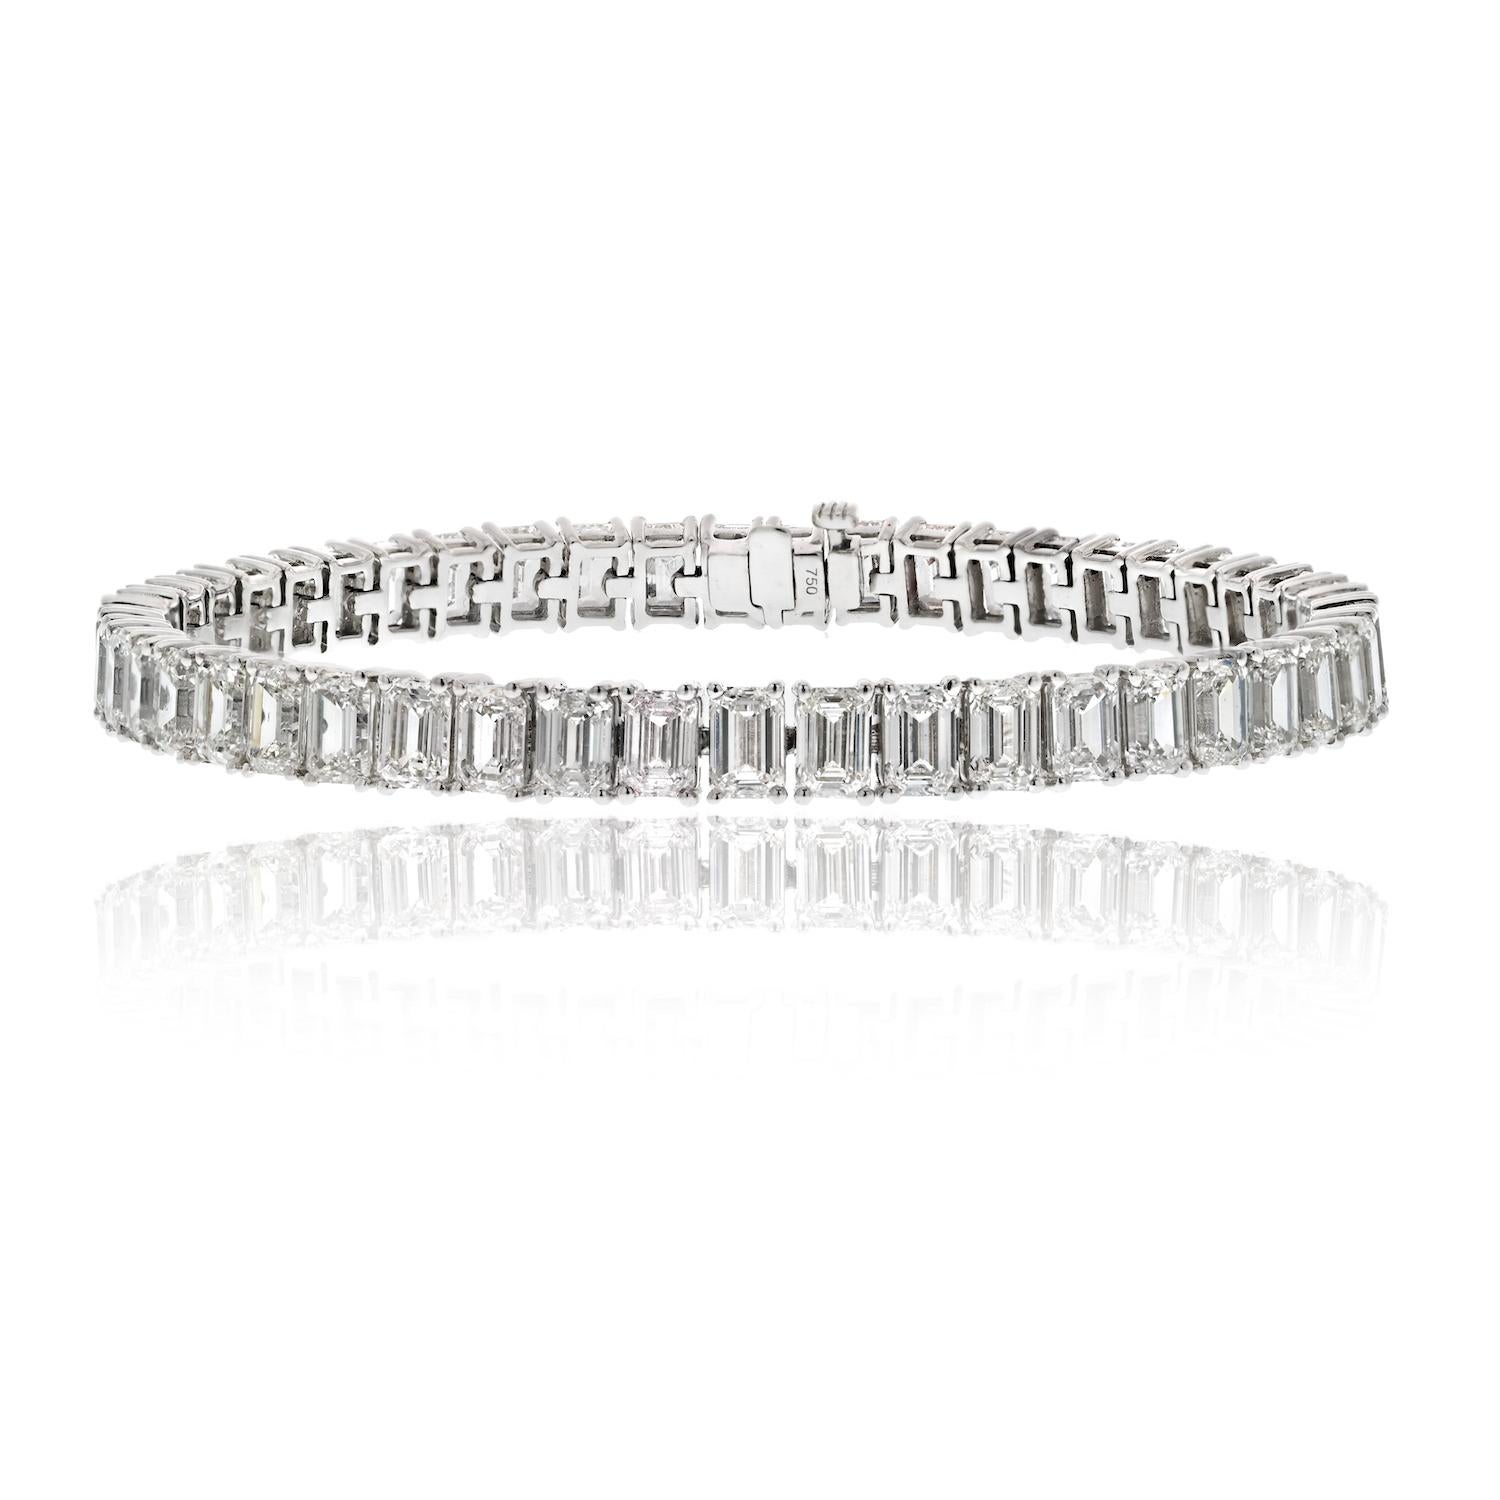 Elevate your elegance with our 18K White Gold 19.00cttw Emerald Cut Diamond Straight Line Tennis Bracelet. This exquisite piece is a testament to timeless sophistication and impeccable craftsmanship. 7 inches long. 

Crafted in lustrous 18K white